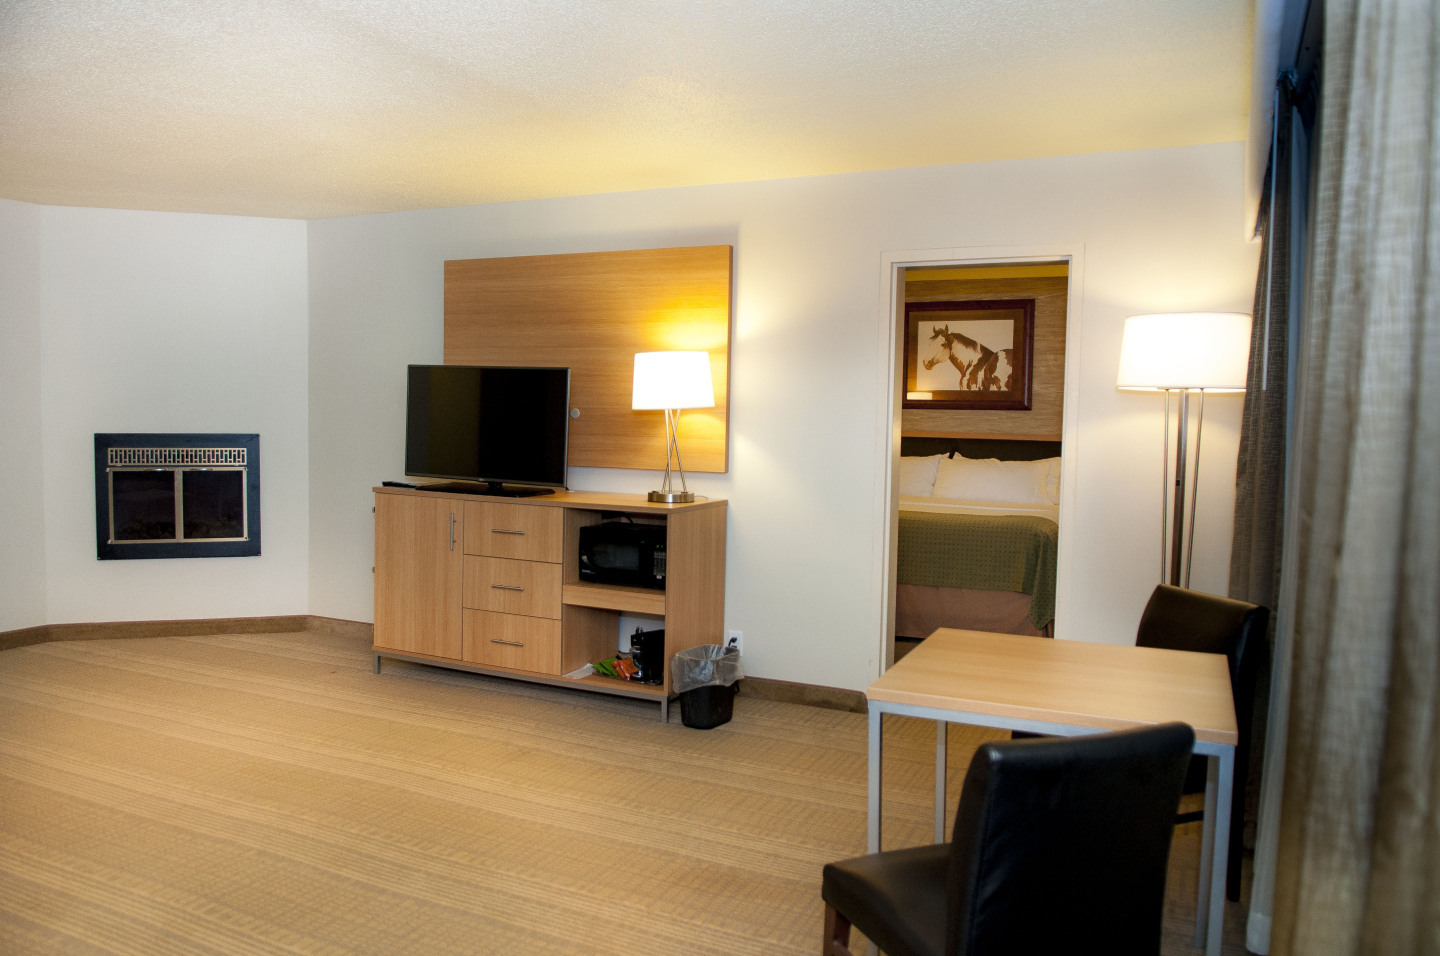 Spearfish Holiday Inn Two-Room Suite with Fireplace